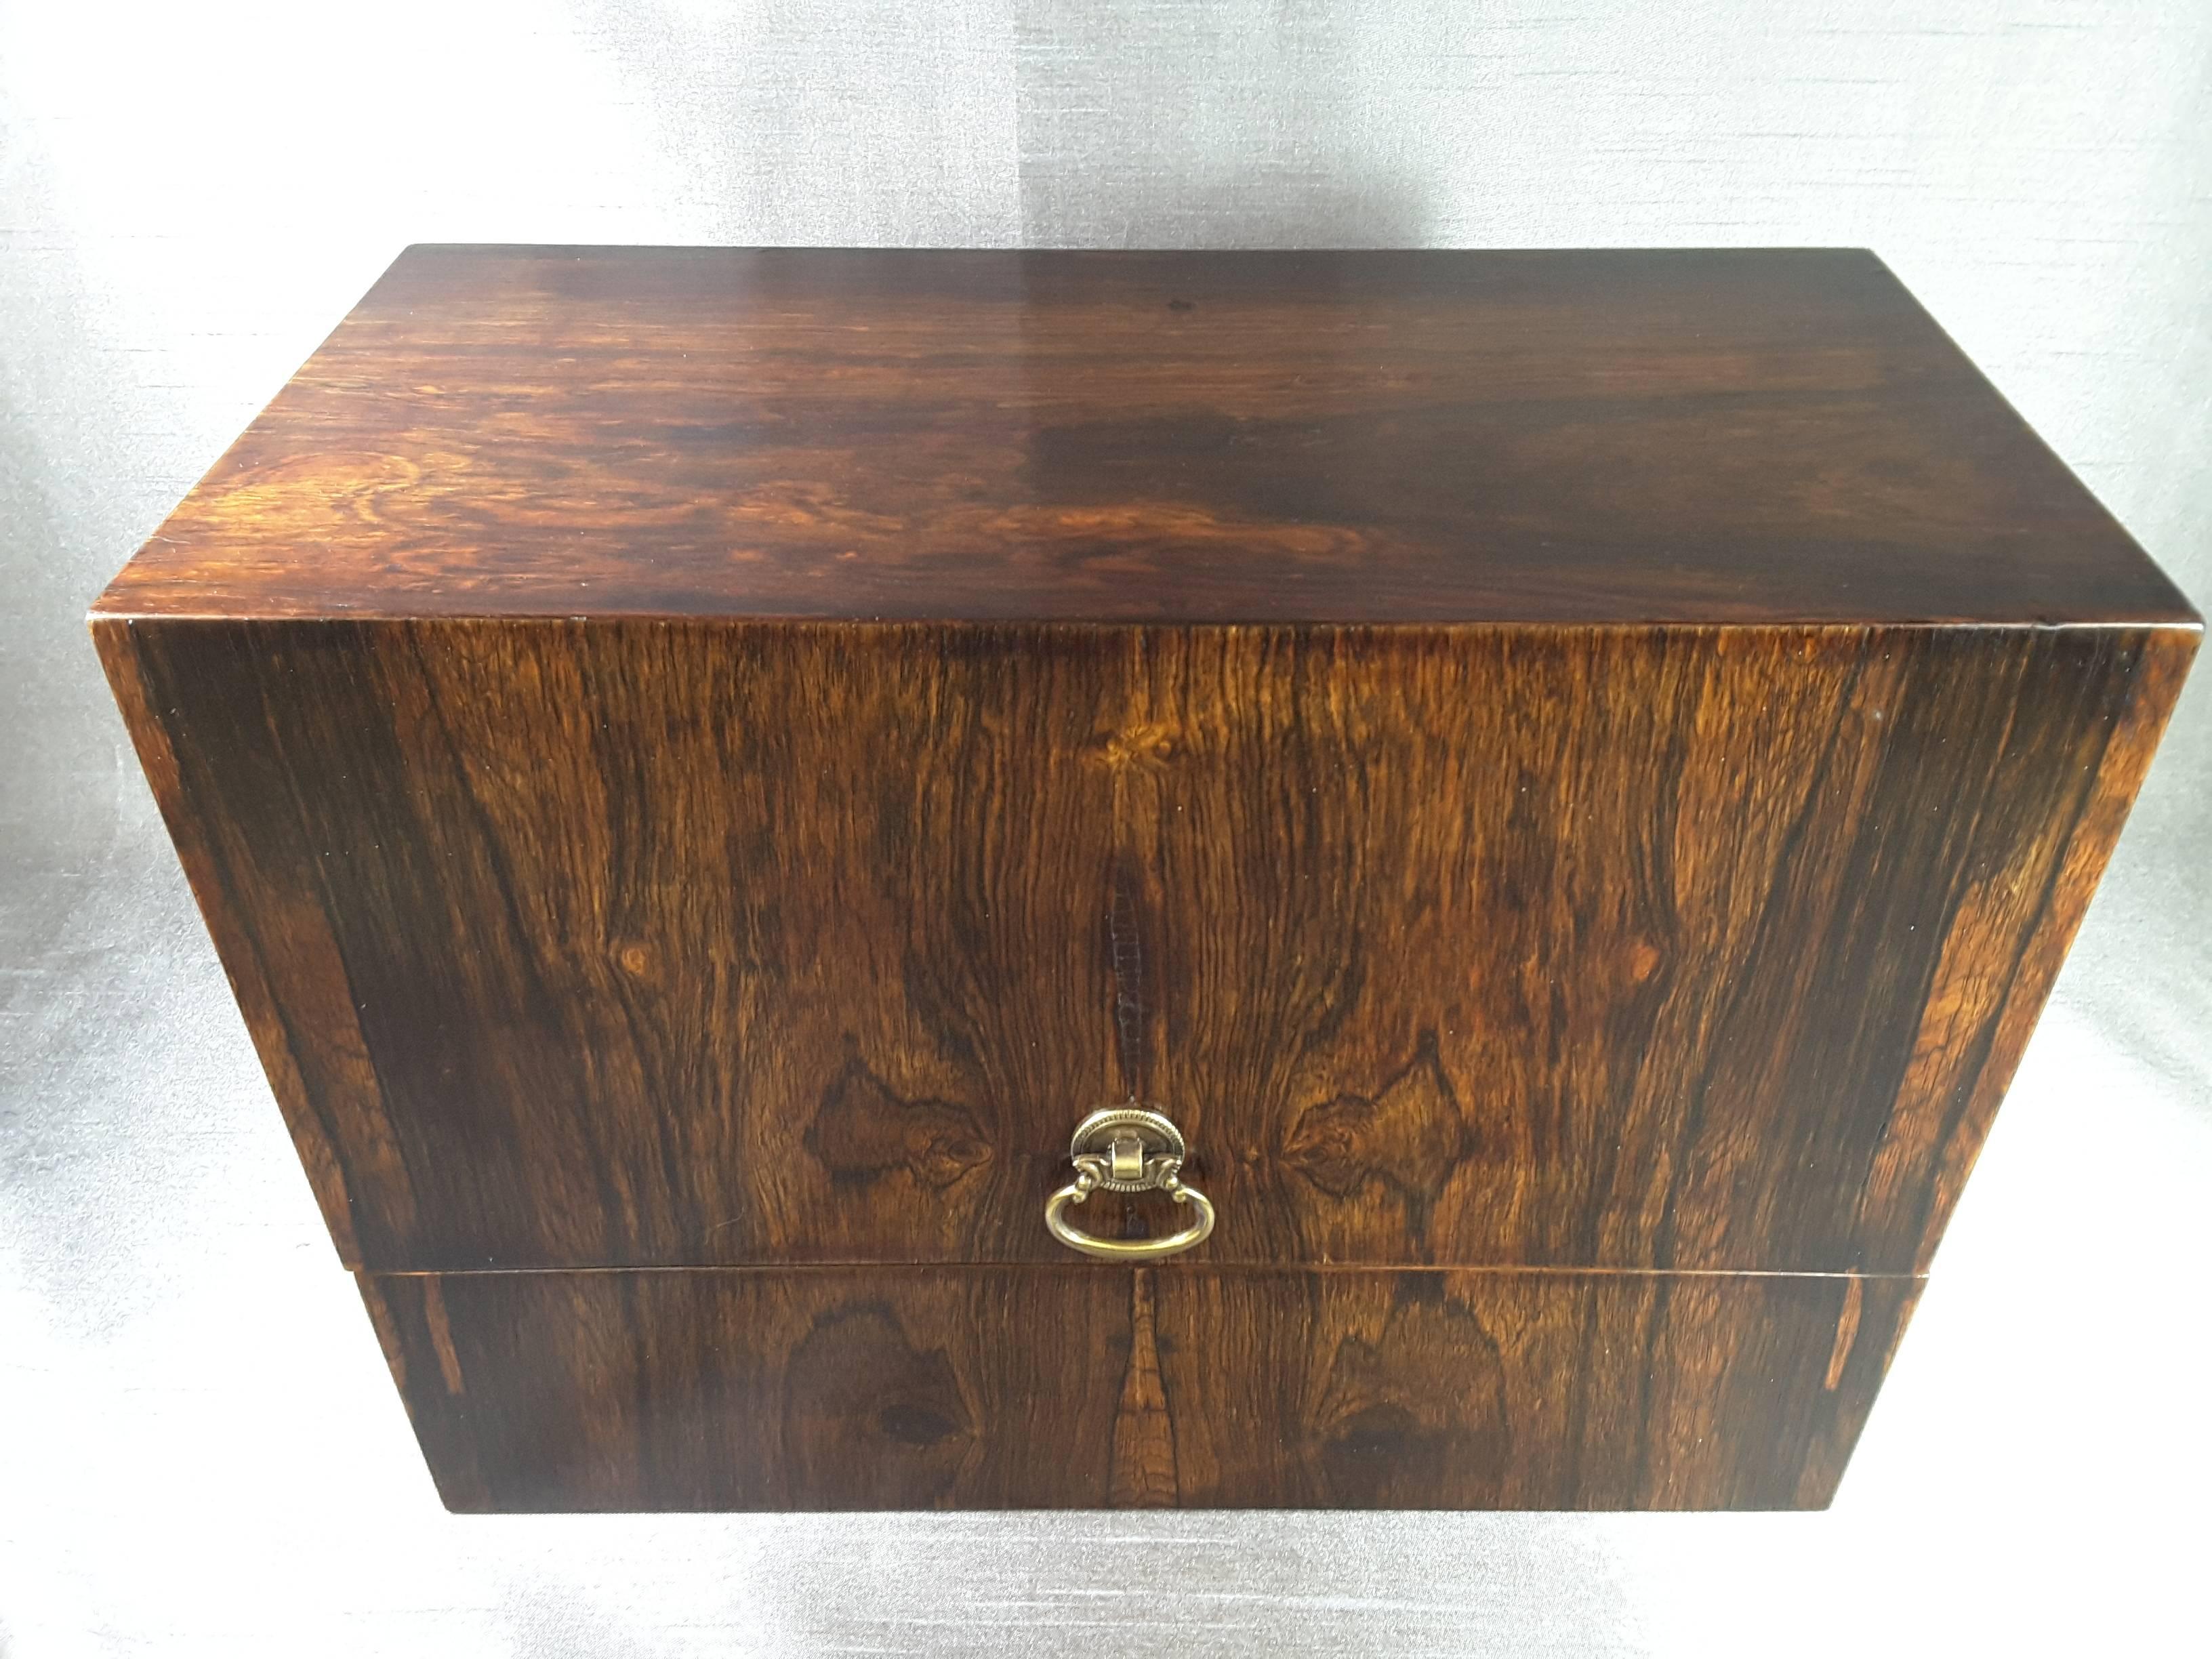 Rosewood upright canteen or cutlery box with a flip top, center pull front brass handle, the cutlery stands upright in the canteen and has section for serving pieces on the back left side. The cutlery canteen measures 11 11/4